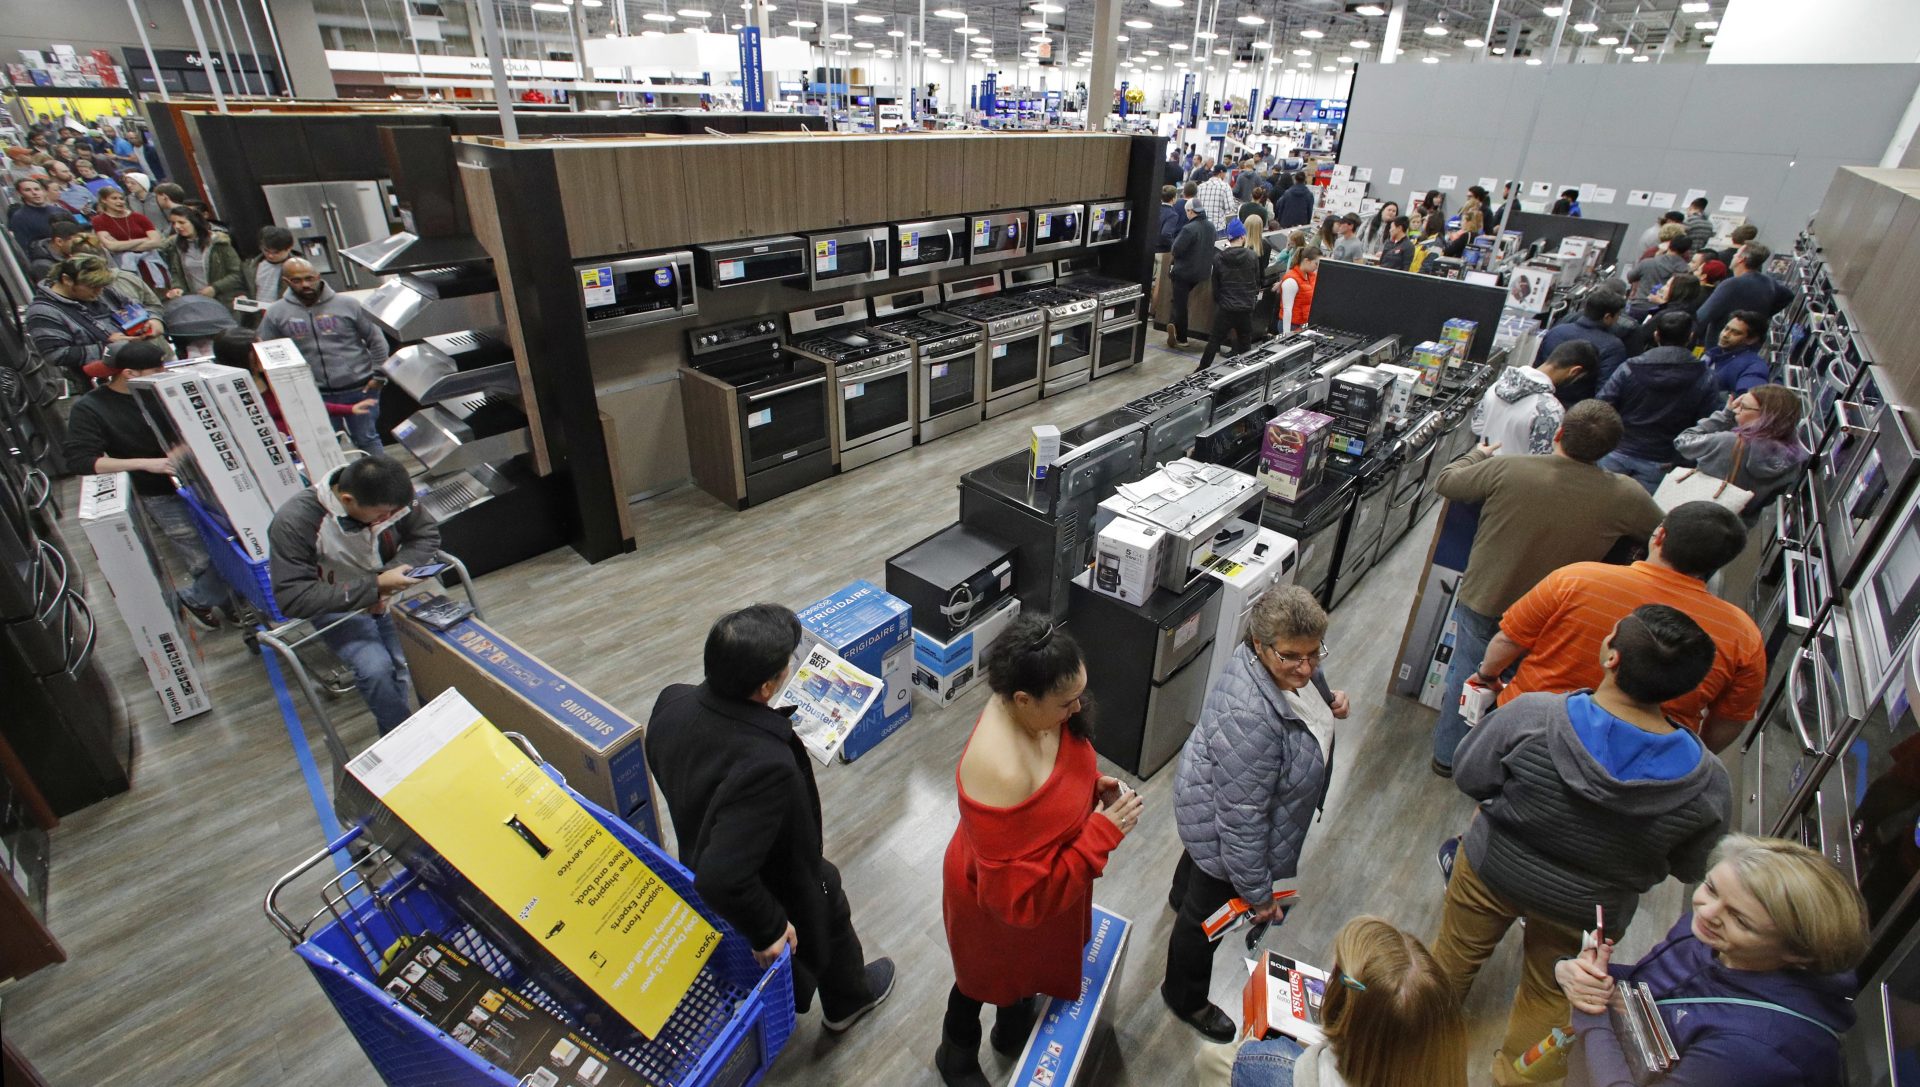 FILE PHOTO: In this Nov. 22, 2018, file photo people line up to pay for their purchases as they shop during an early Black Friday sale at a Best Buy store on Thanksgiving Day in Overland Park, Kan. Consumer spending rose a sharp 0.6 percent last month, the Commerce Department reported Thursday, Nov. 29.